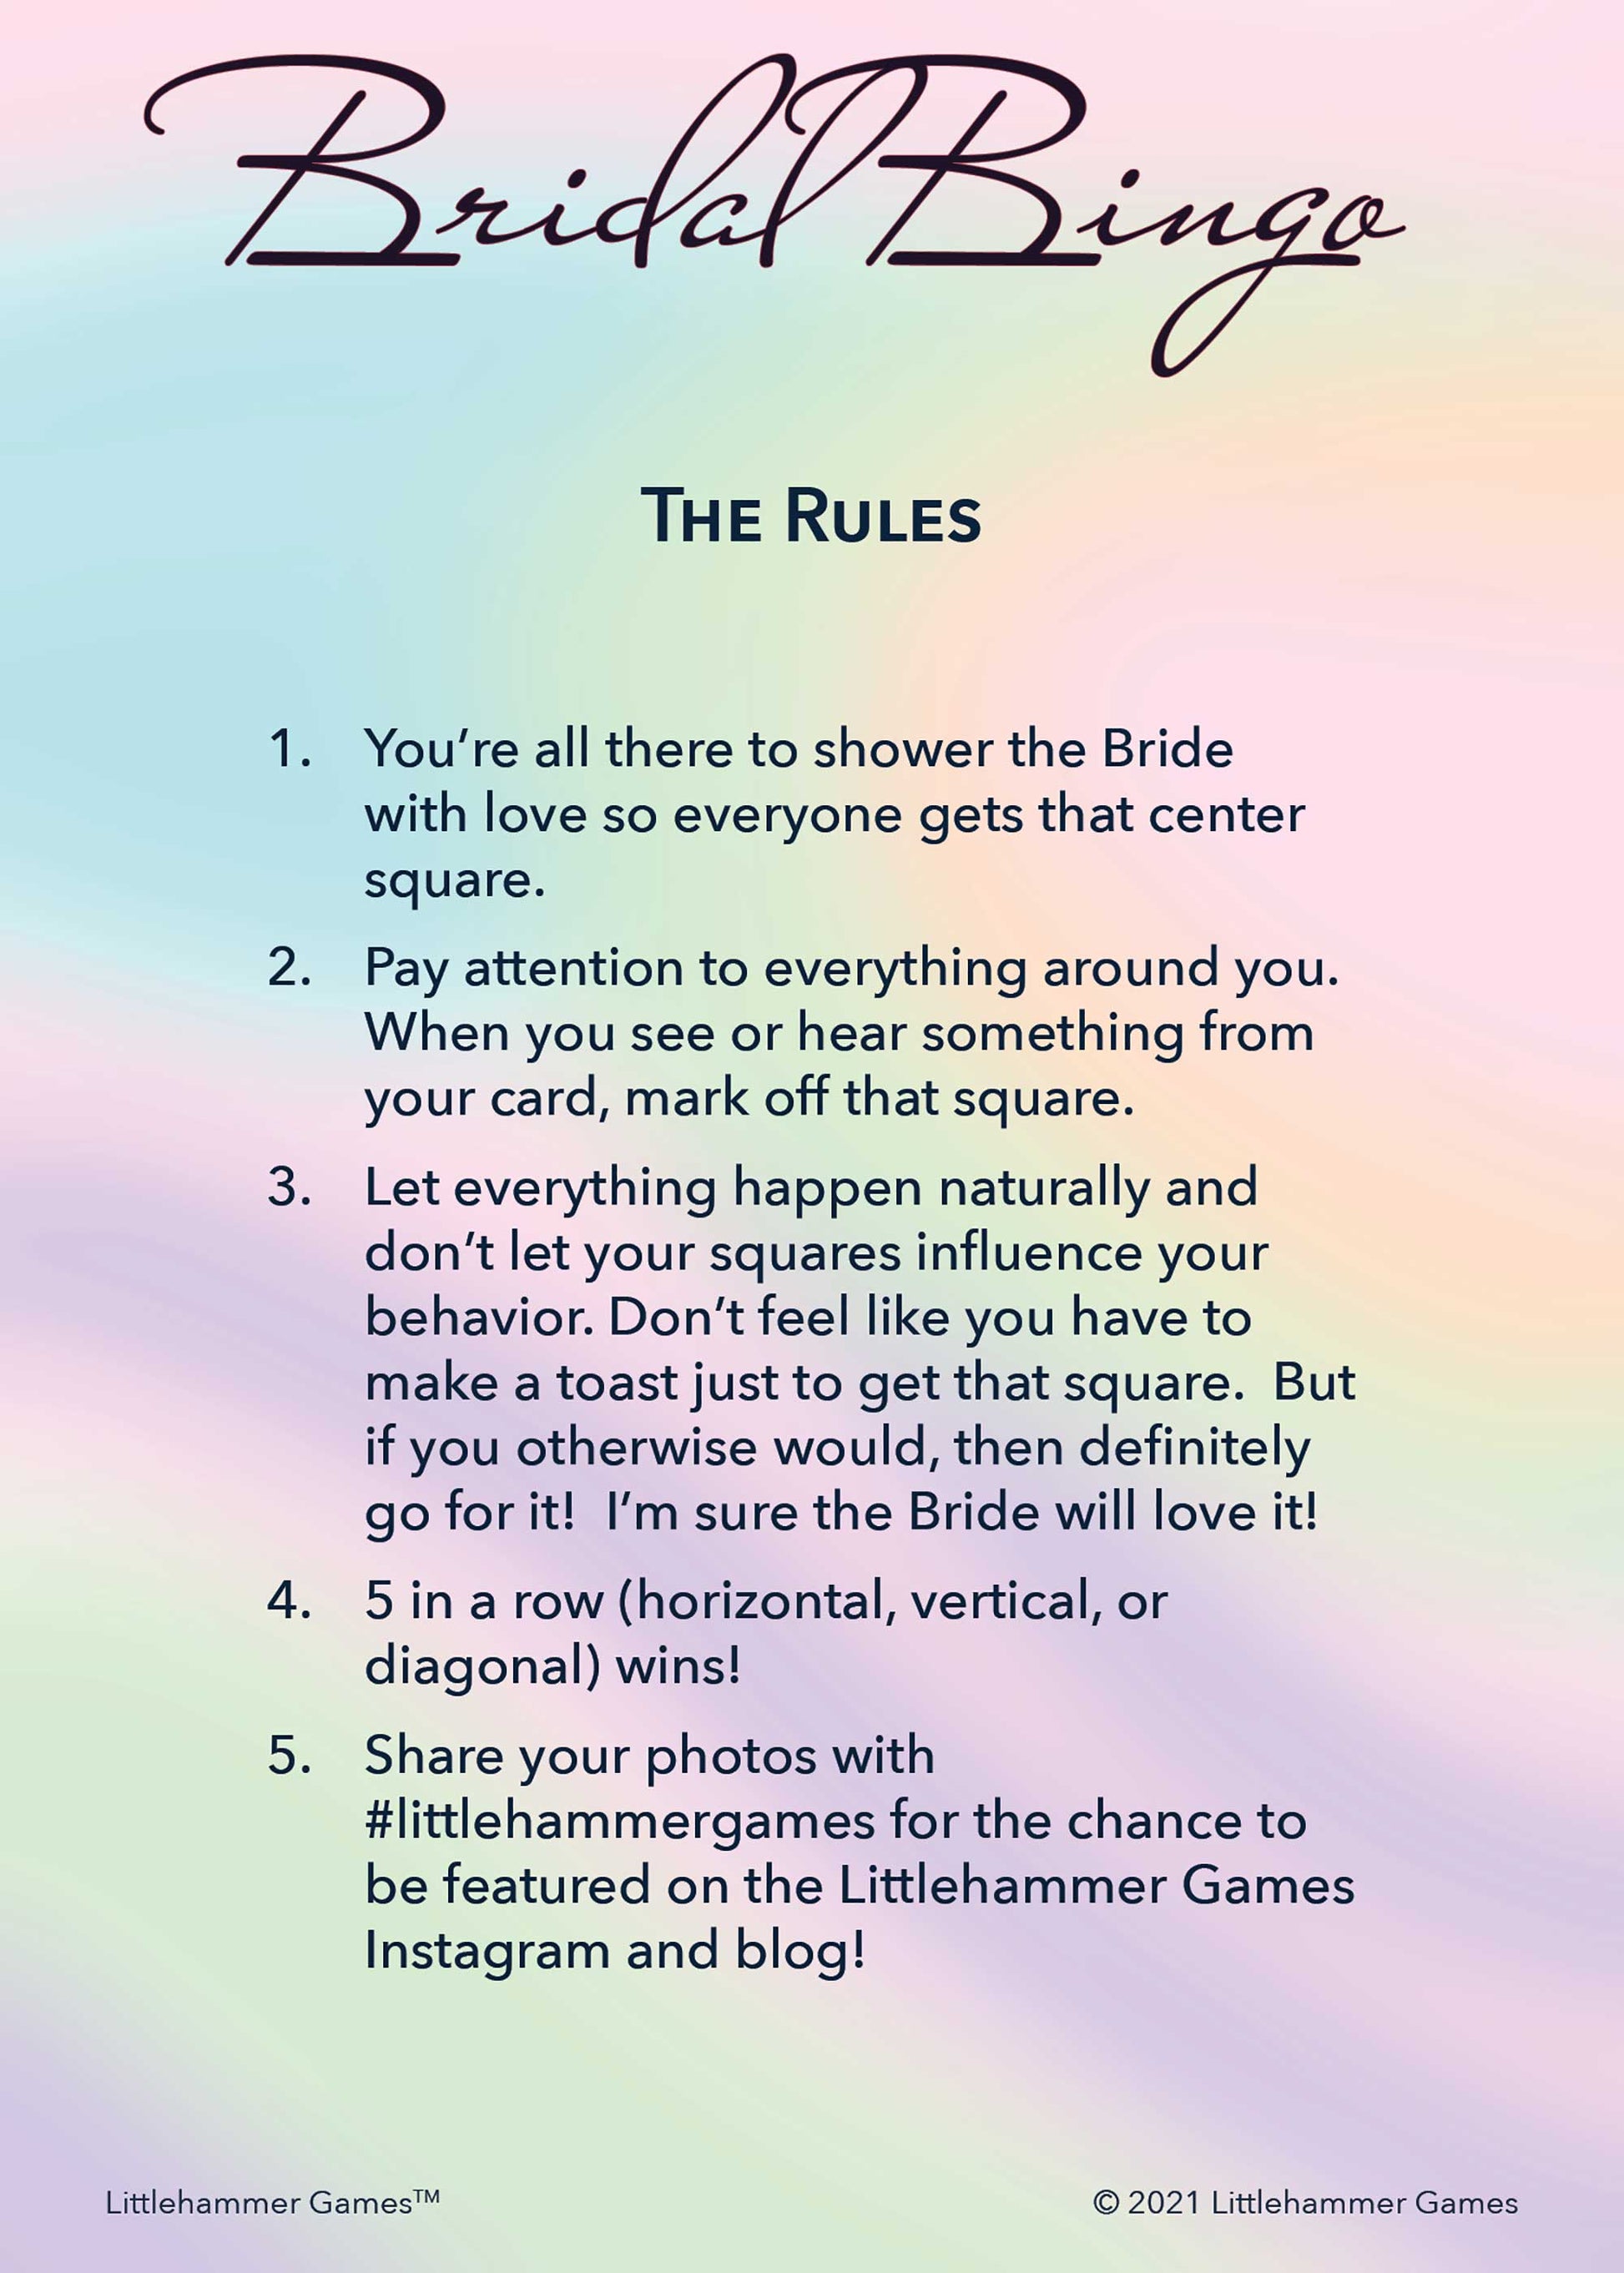 Bridal Bingo rules card on an iridescent background